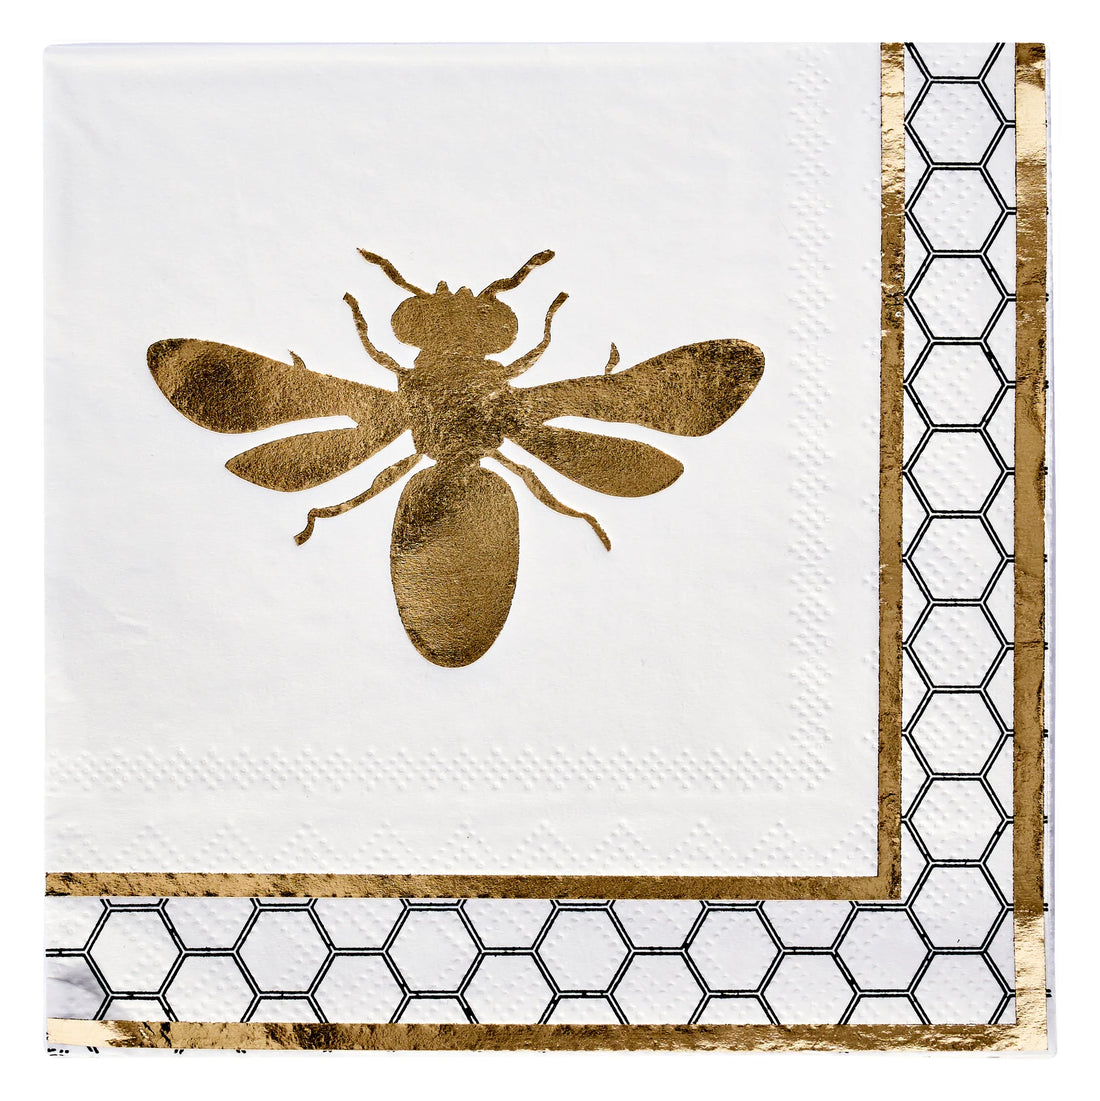 Paper cocktail napkins featuring a gold-painted bee design, ideal for parties. Elevate your dining experience with HoneyBee Paper Cocktail Napkins. From Party Social&